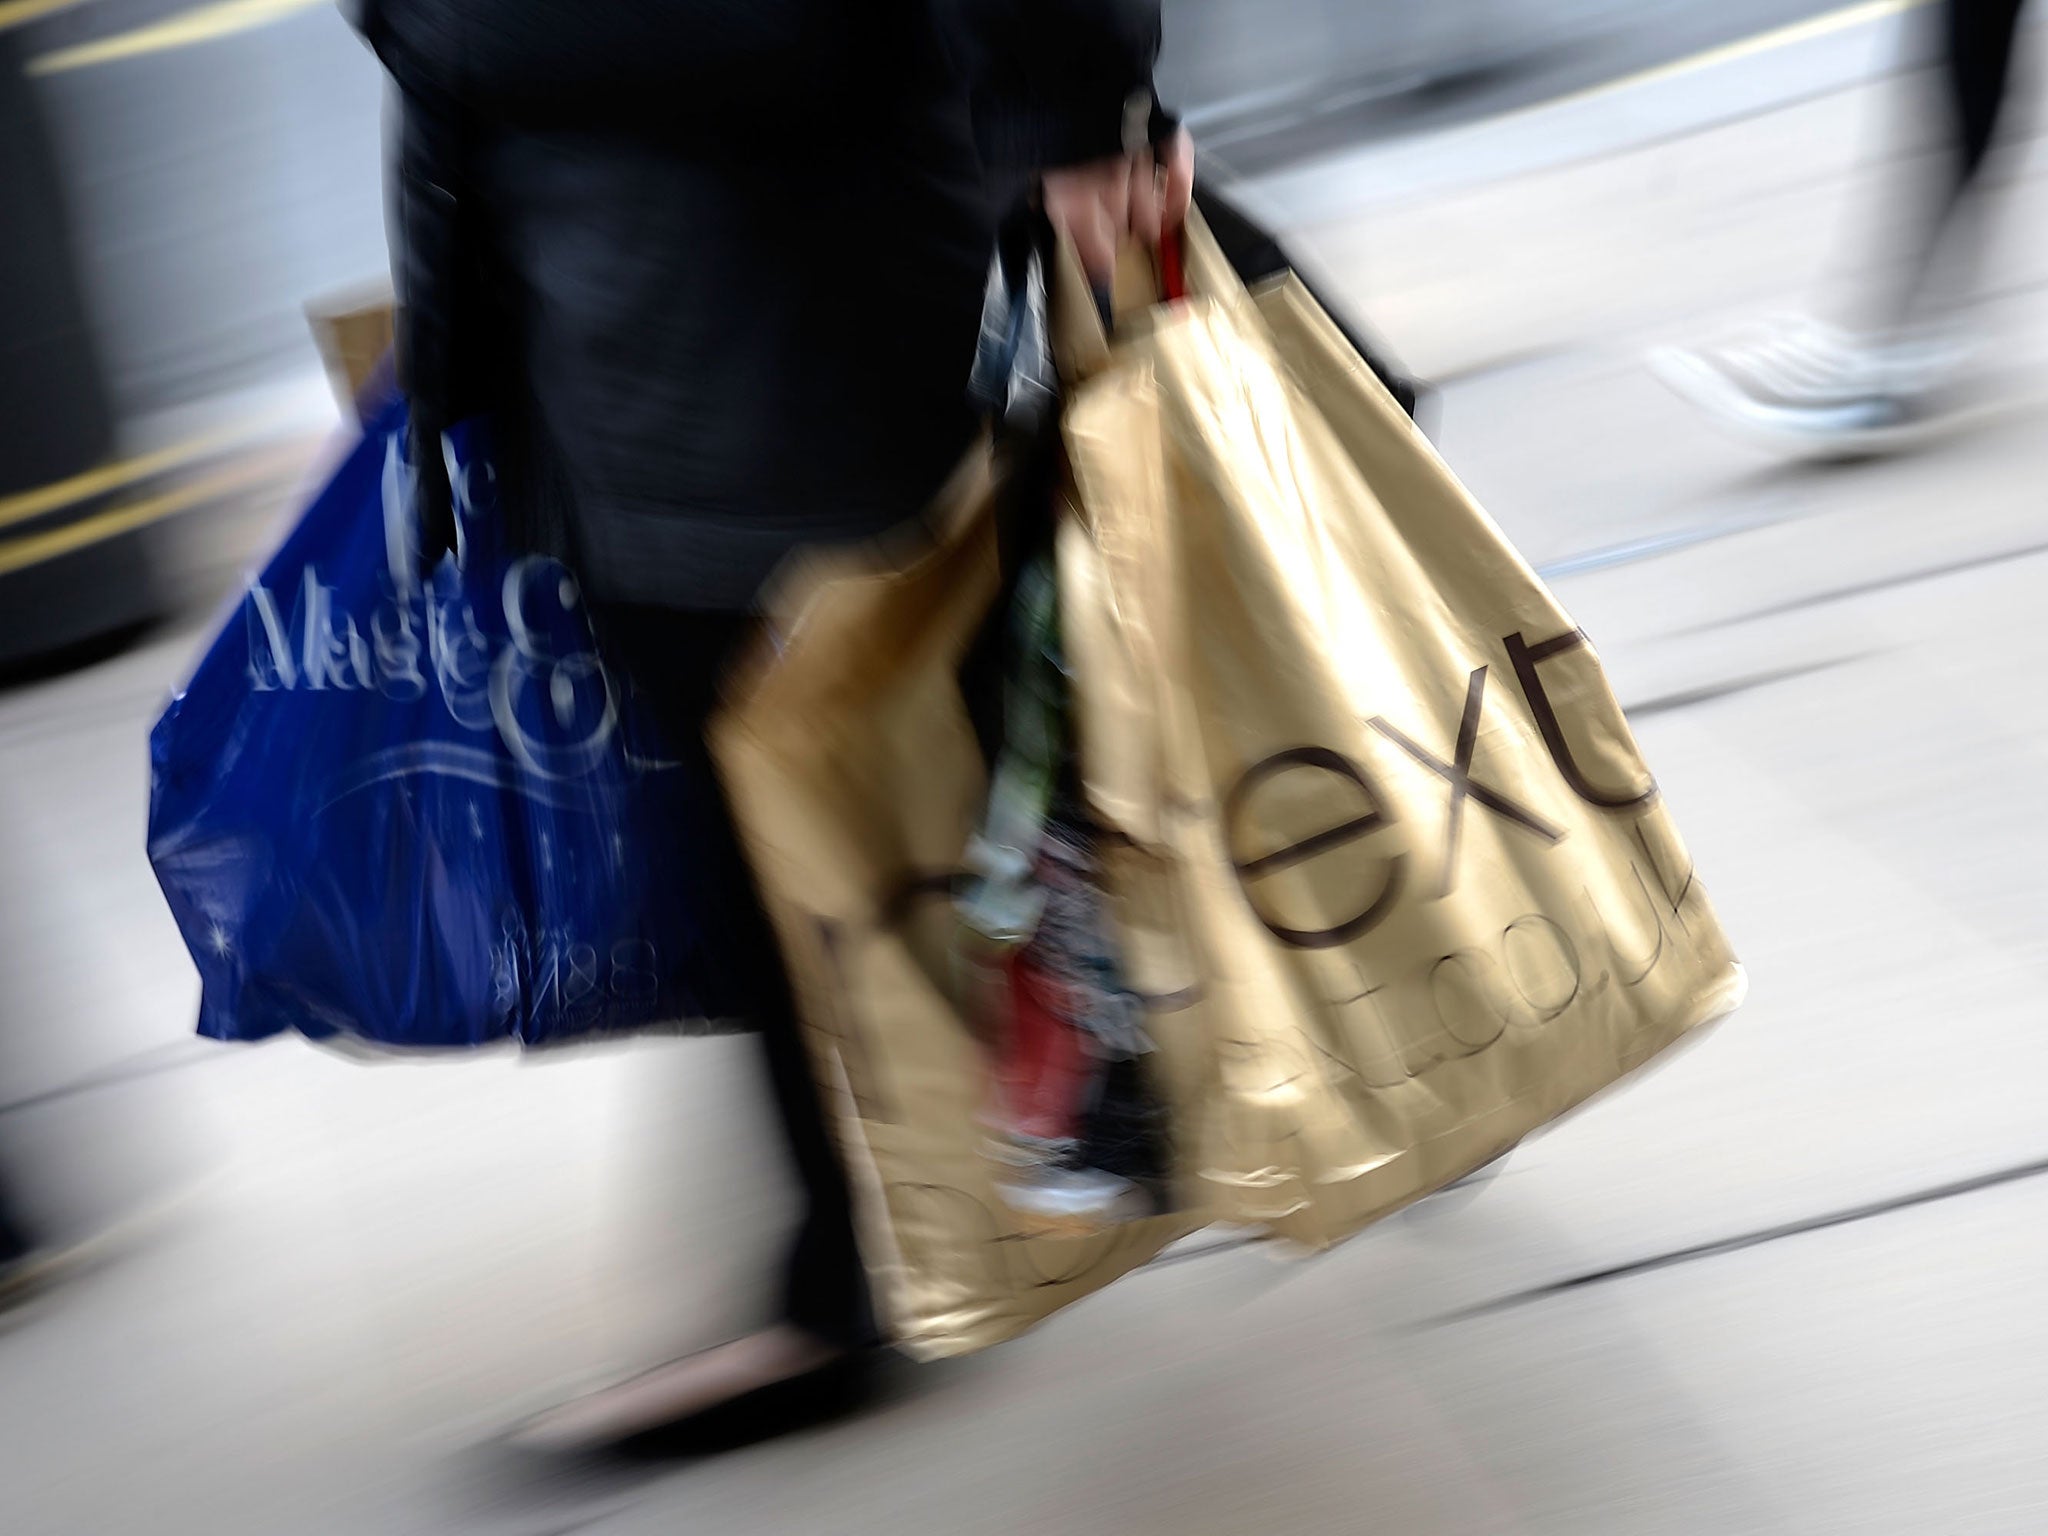 Retail sales fell in the month of the EU referendum